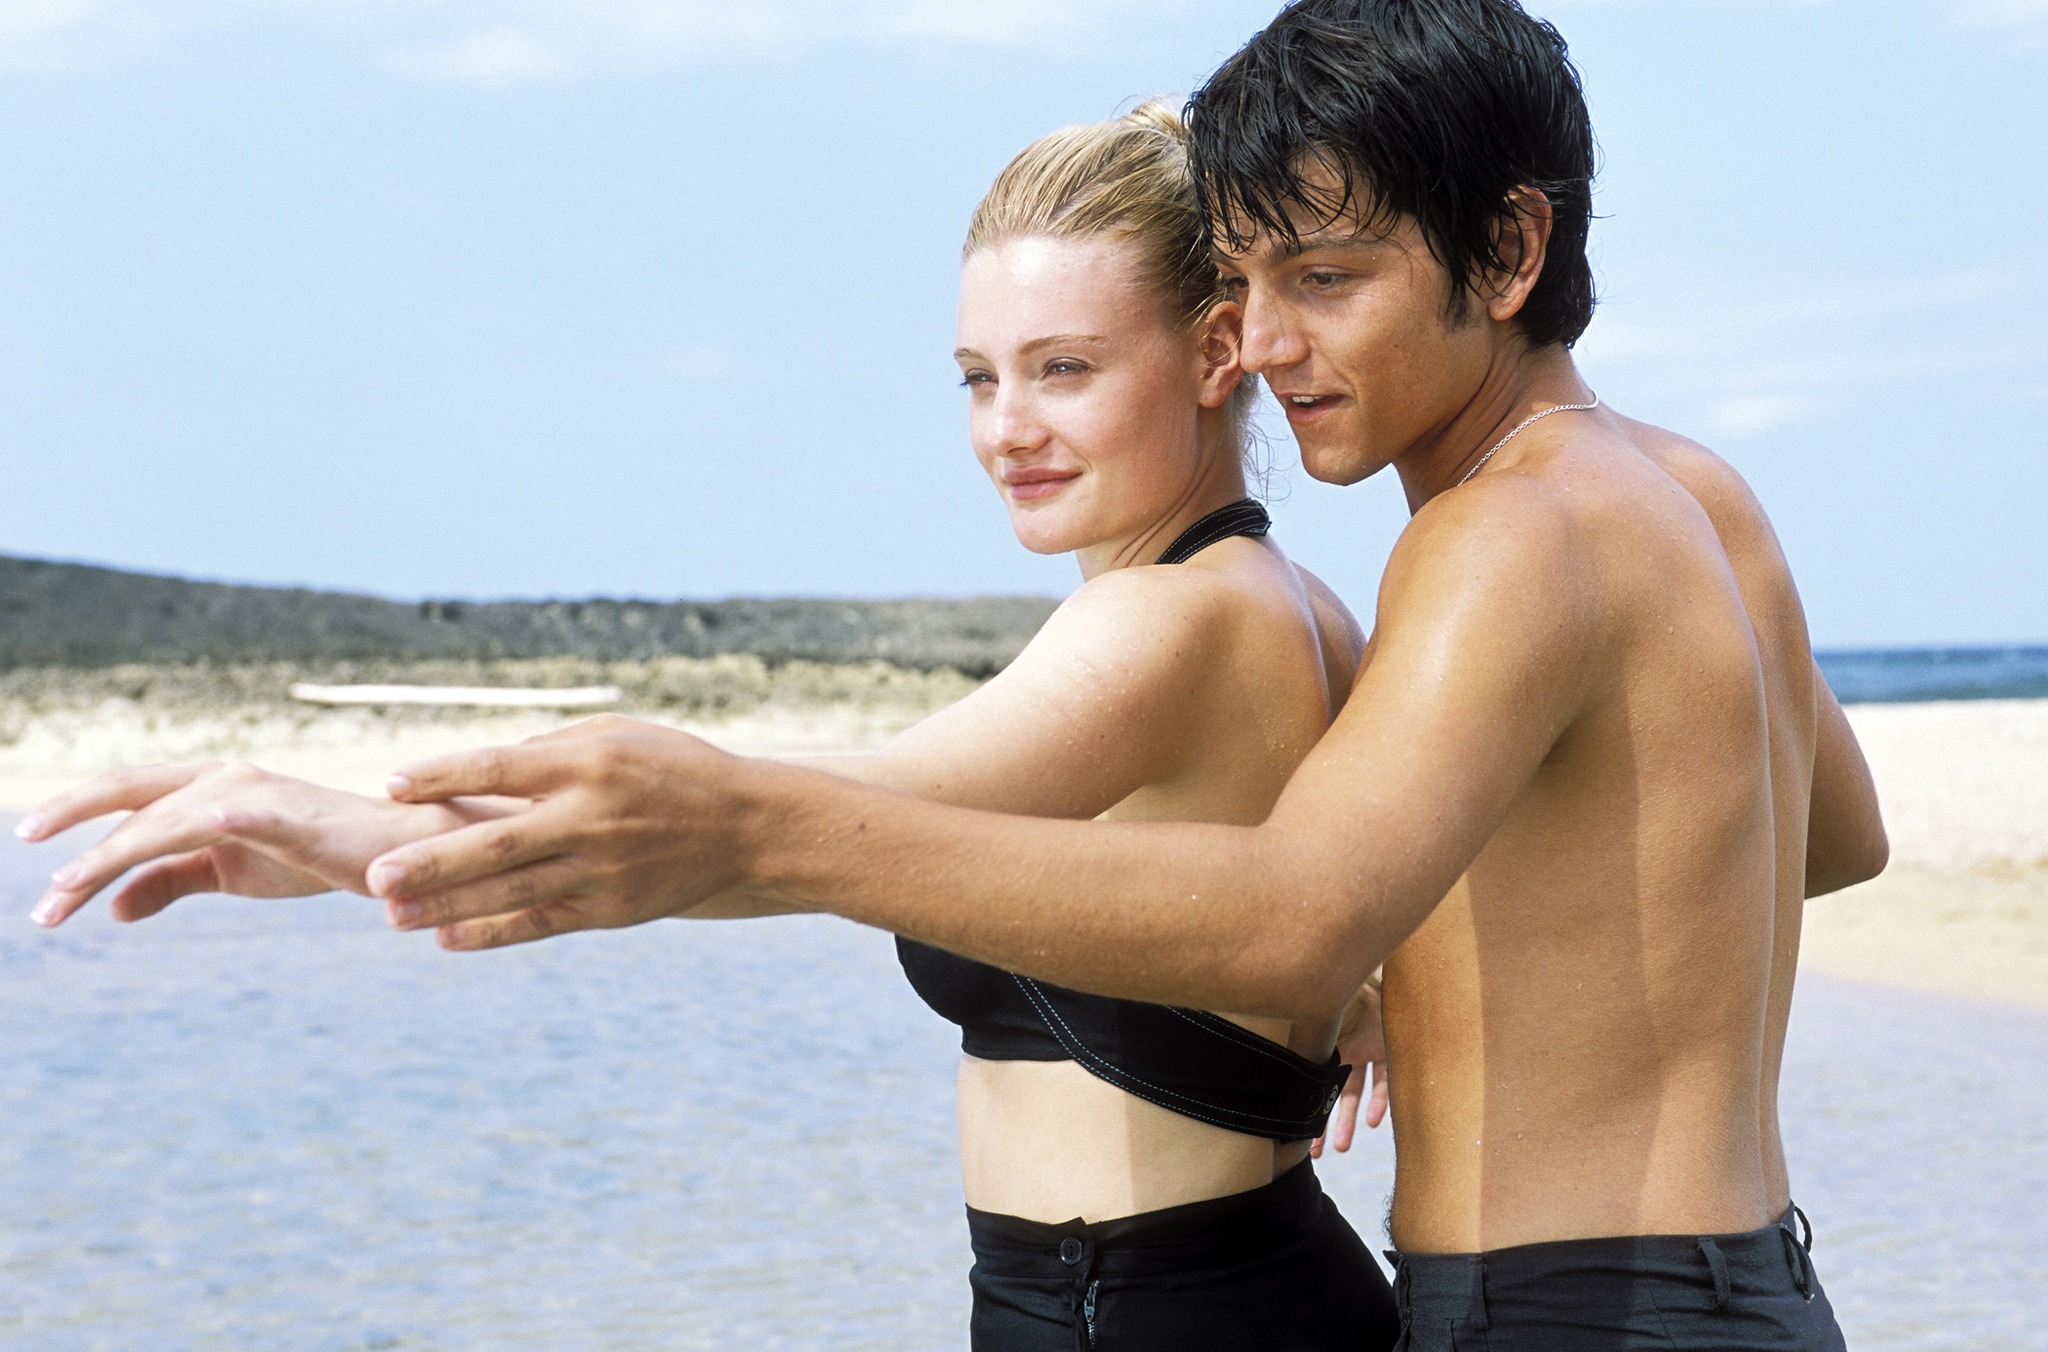 scene from dirty dancing havana nights where diego luna - shirtless with black shorts - teaches romola garai (wearing a black two piece swimsuit) some moves beside a beach